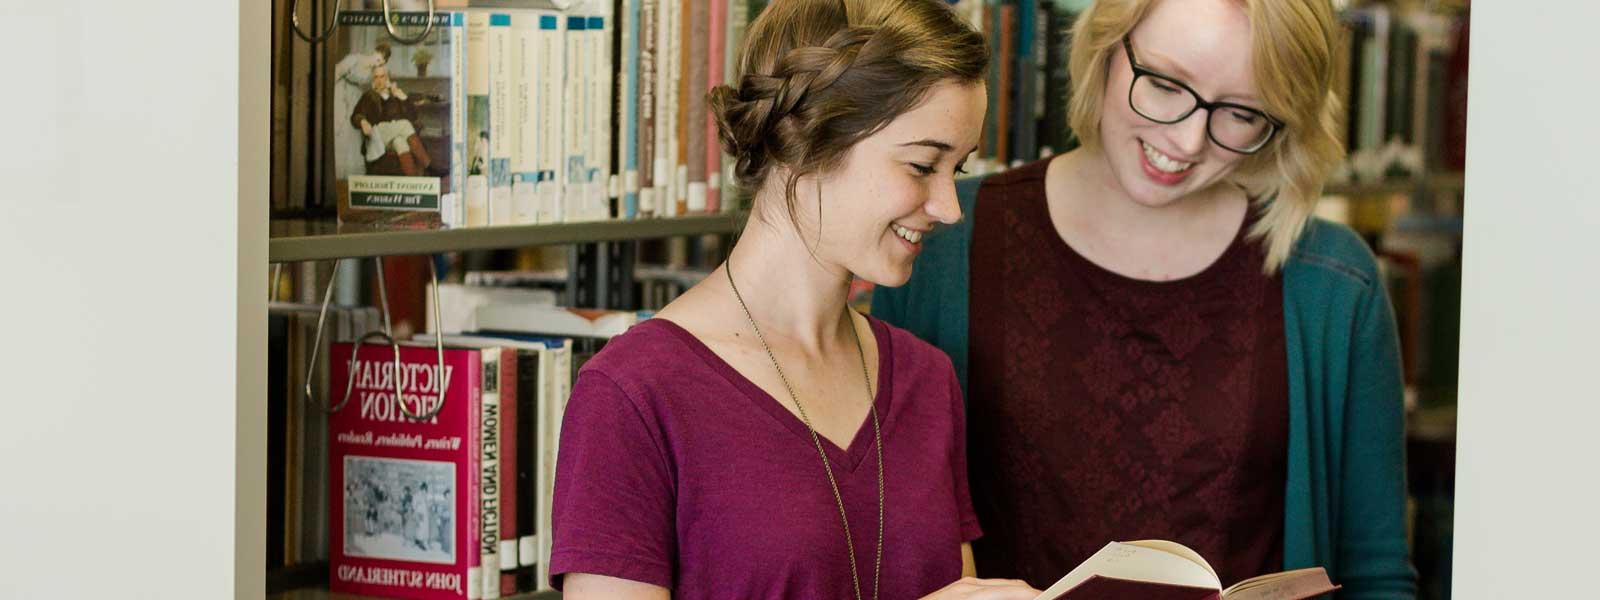 two students look at book in library